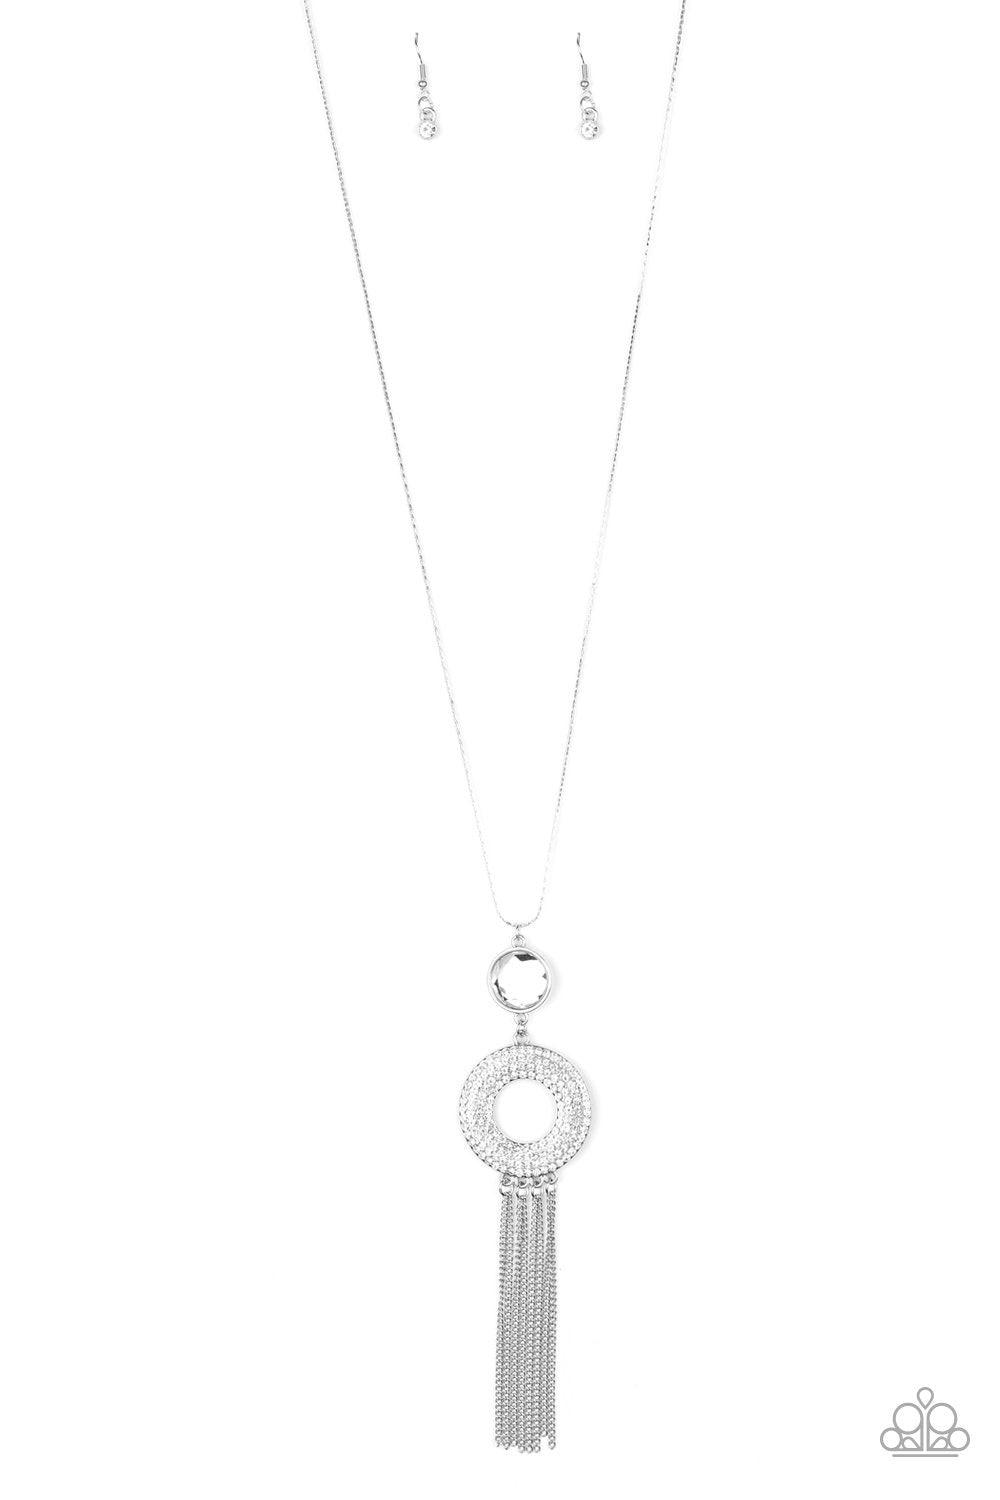 Paparazzi Accessories Sassy As They Come - White A large rounded rhinestone dangles above a glistening white rhinestone encrusted ring which swings from the bottom of a lengthened silver chain, creating a glamorous pendant. Rounded silver snake chains str